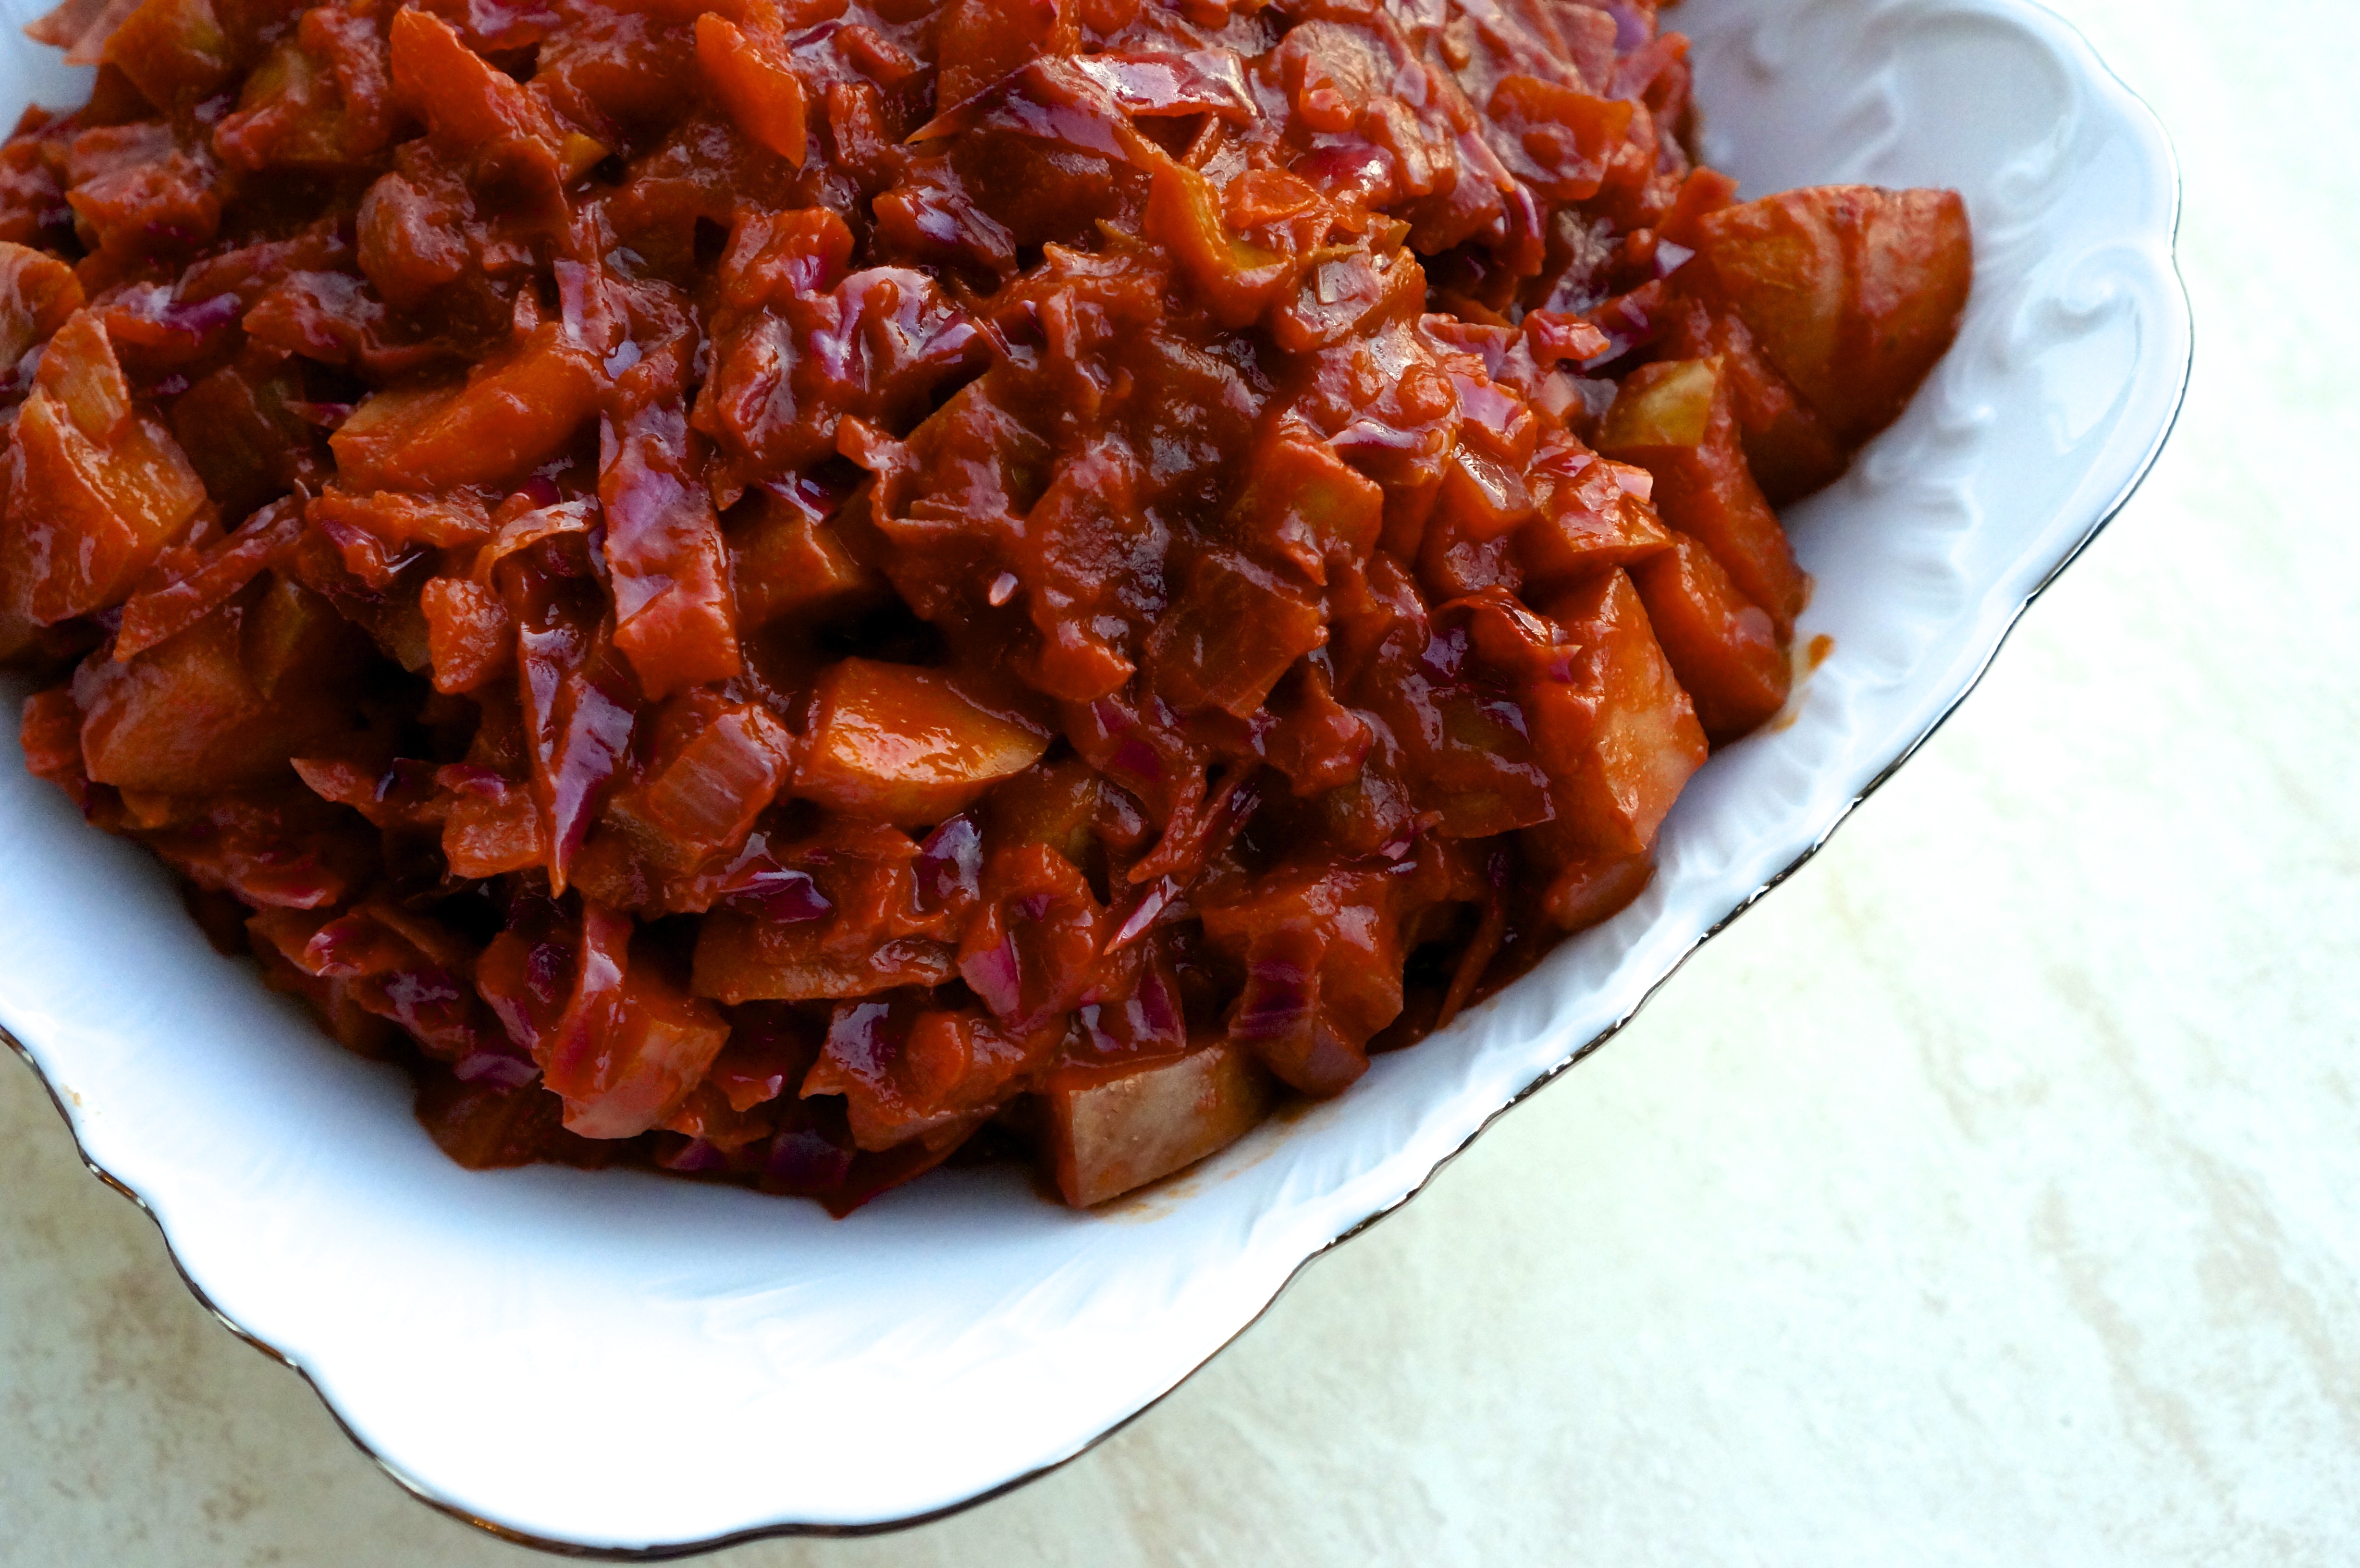 Stewed Red Cabbage with Apples and Potatoes